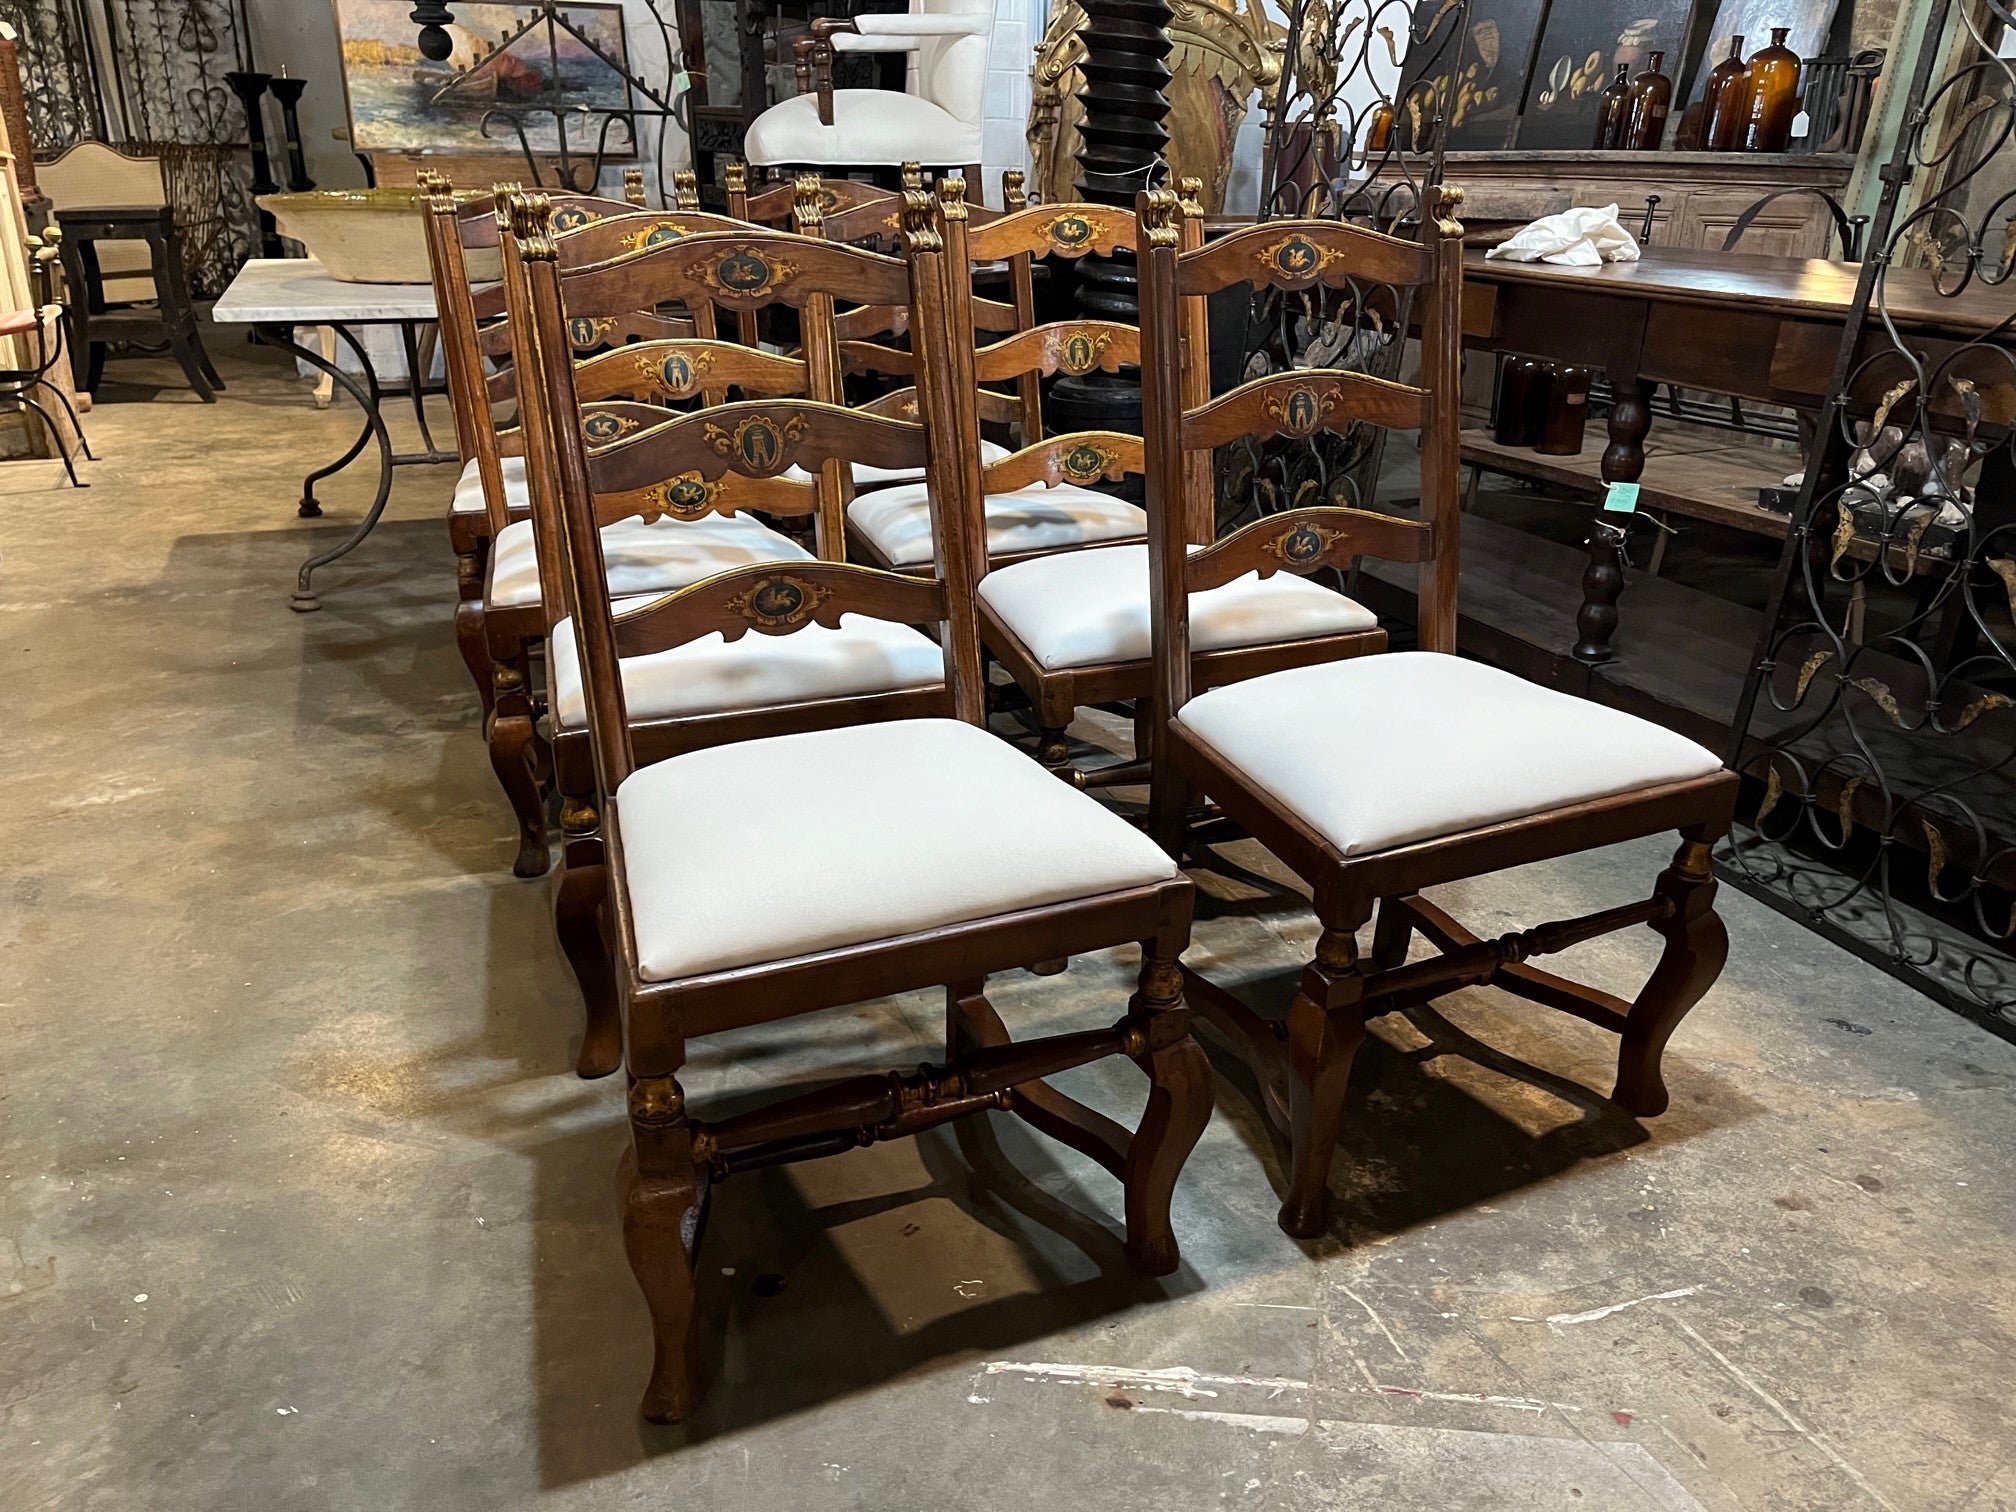 A very handsome set of 8 early 18th century Dining Chairs from the Lombardy region of Italy.  Wonderfully constructed from walnut with gilt and painted detail.  The seat cushions have recently been reupholstered and remove easily.  The seat height